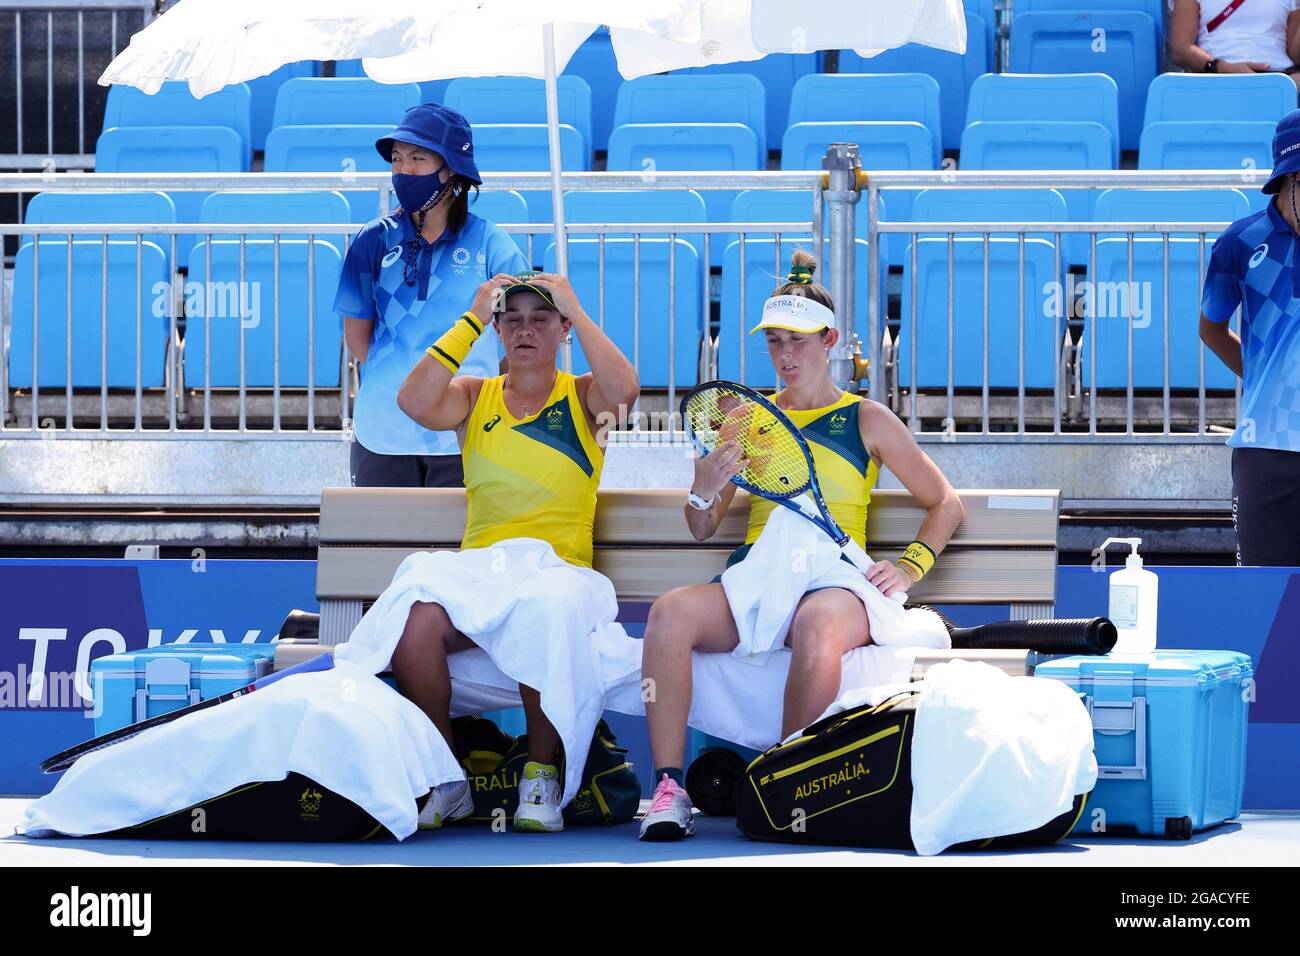 Tokyo, Japan, 28 July, 2021. Barty and Sanders take a break in the blistering heat during the Women's Doubles Tennis Quarter Final match between Ash Barty and Storm Sanders of Australia and Barbora Krejcikova and Katerina Siniakova of Czech Republic on Day 5 of the 2020 Tokyo Olympics Games. Credit: Dave Hewison/Speed Media/Alamy Live News Tokyo 2020 Olympic Games at Ariake Tennis Park on July 28, 2021 in Tokyo, Japan. (Photo by Pete Dovgan/Speed Media/Alamy Live News) Stock Photo